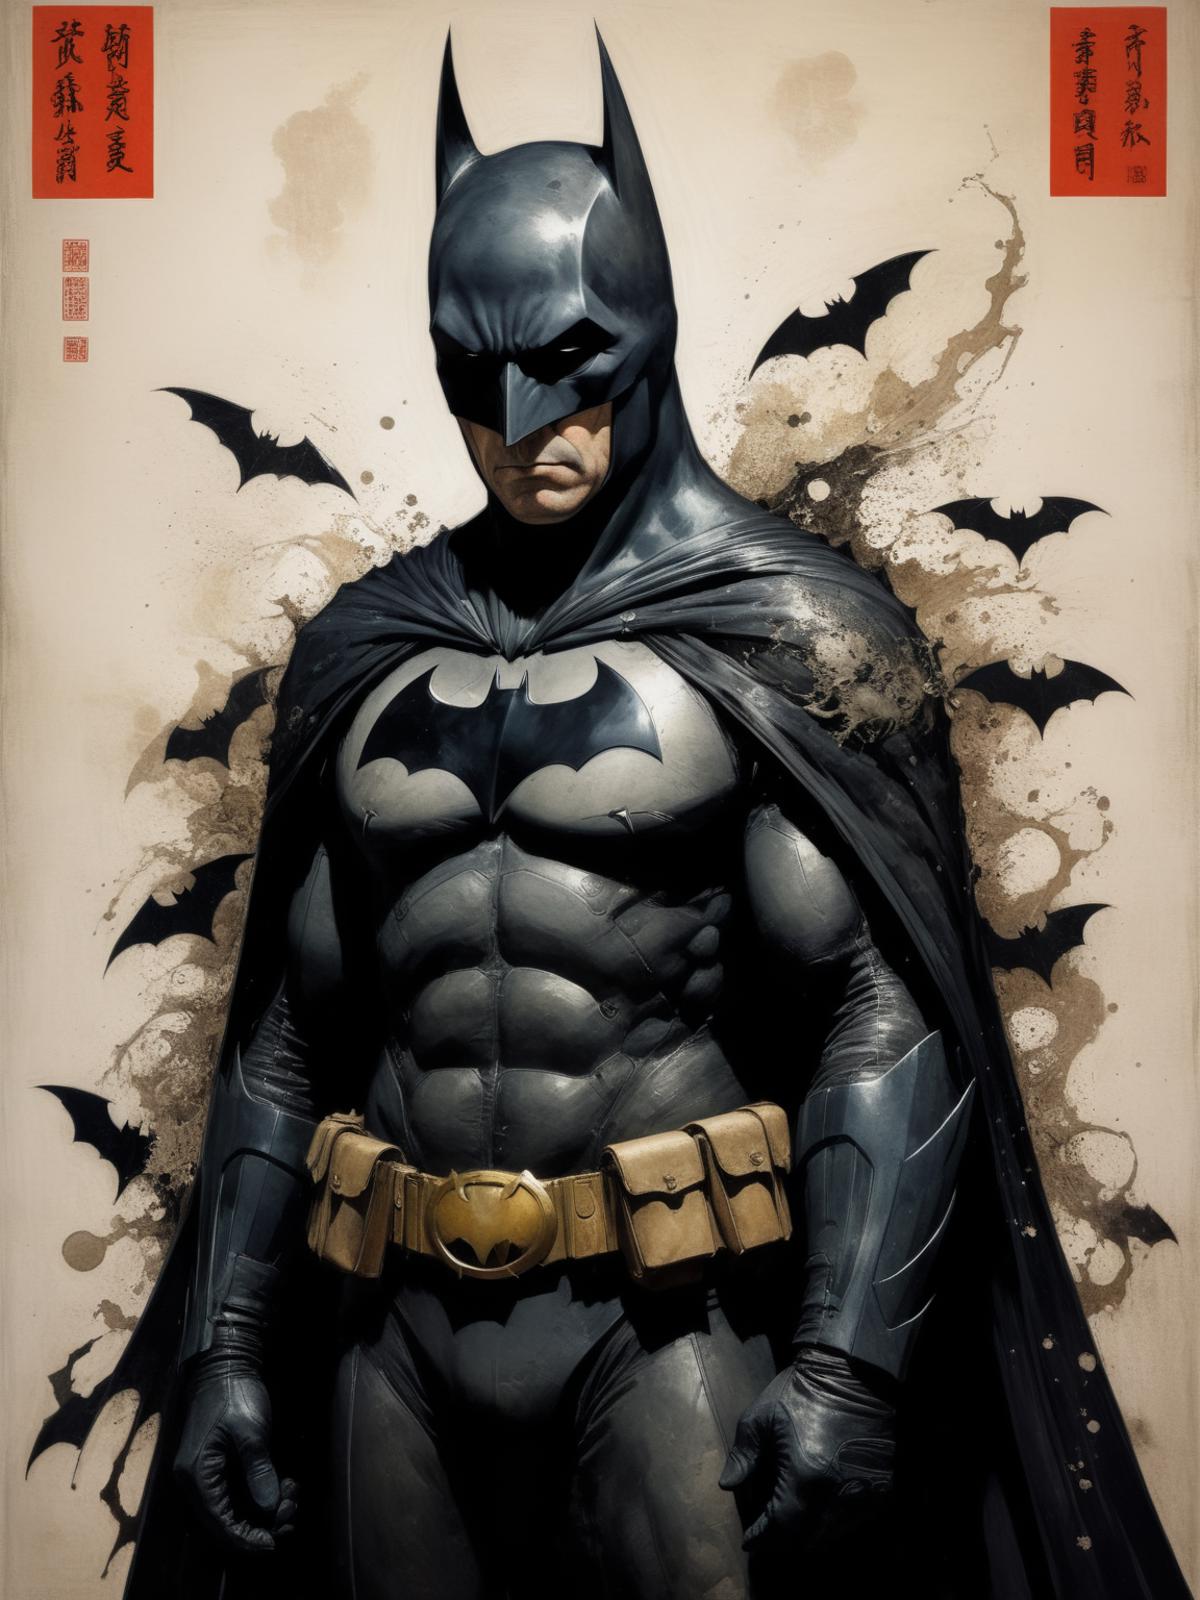 Batman in a black and gold suit.